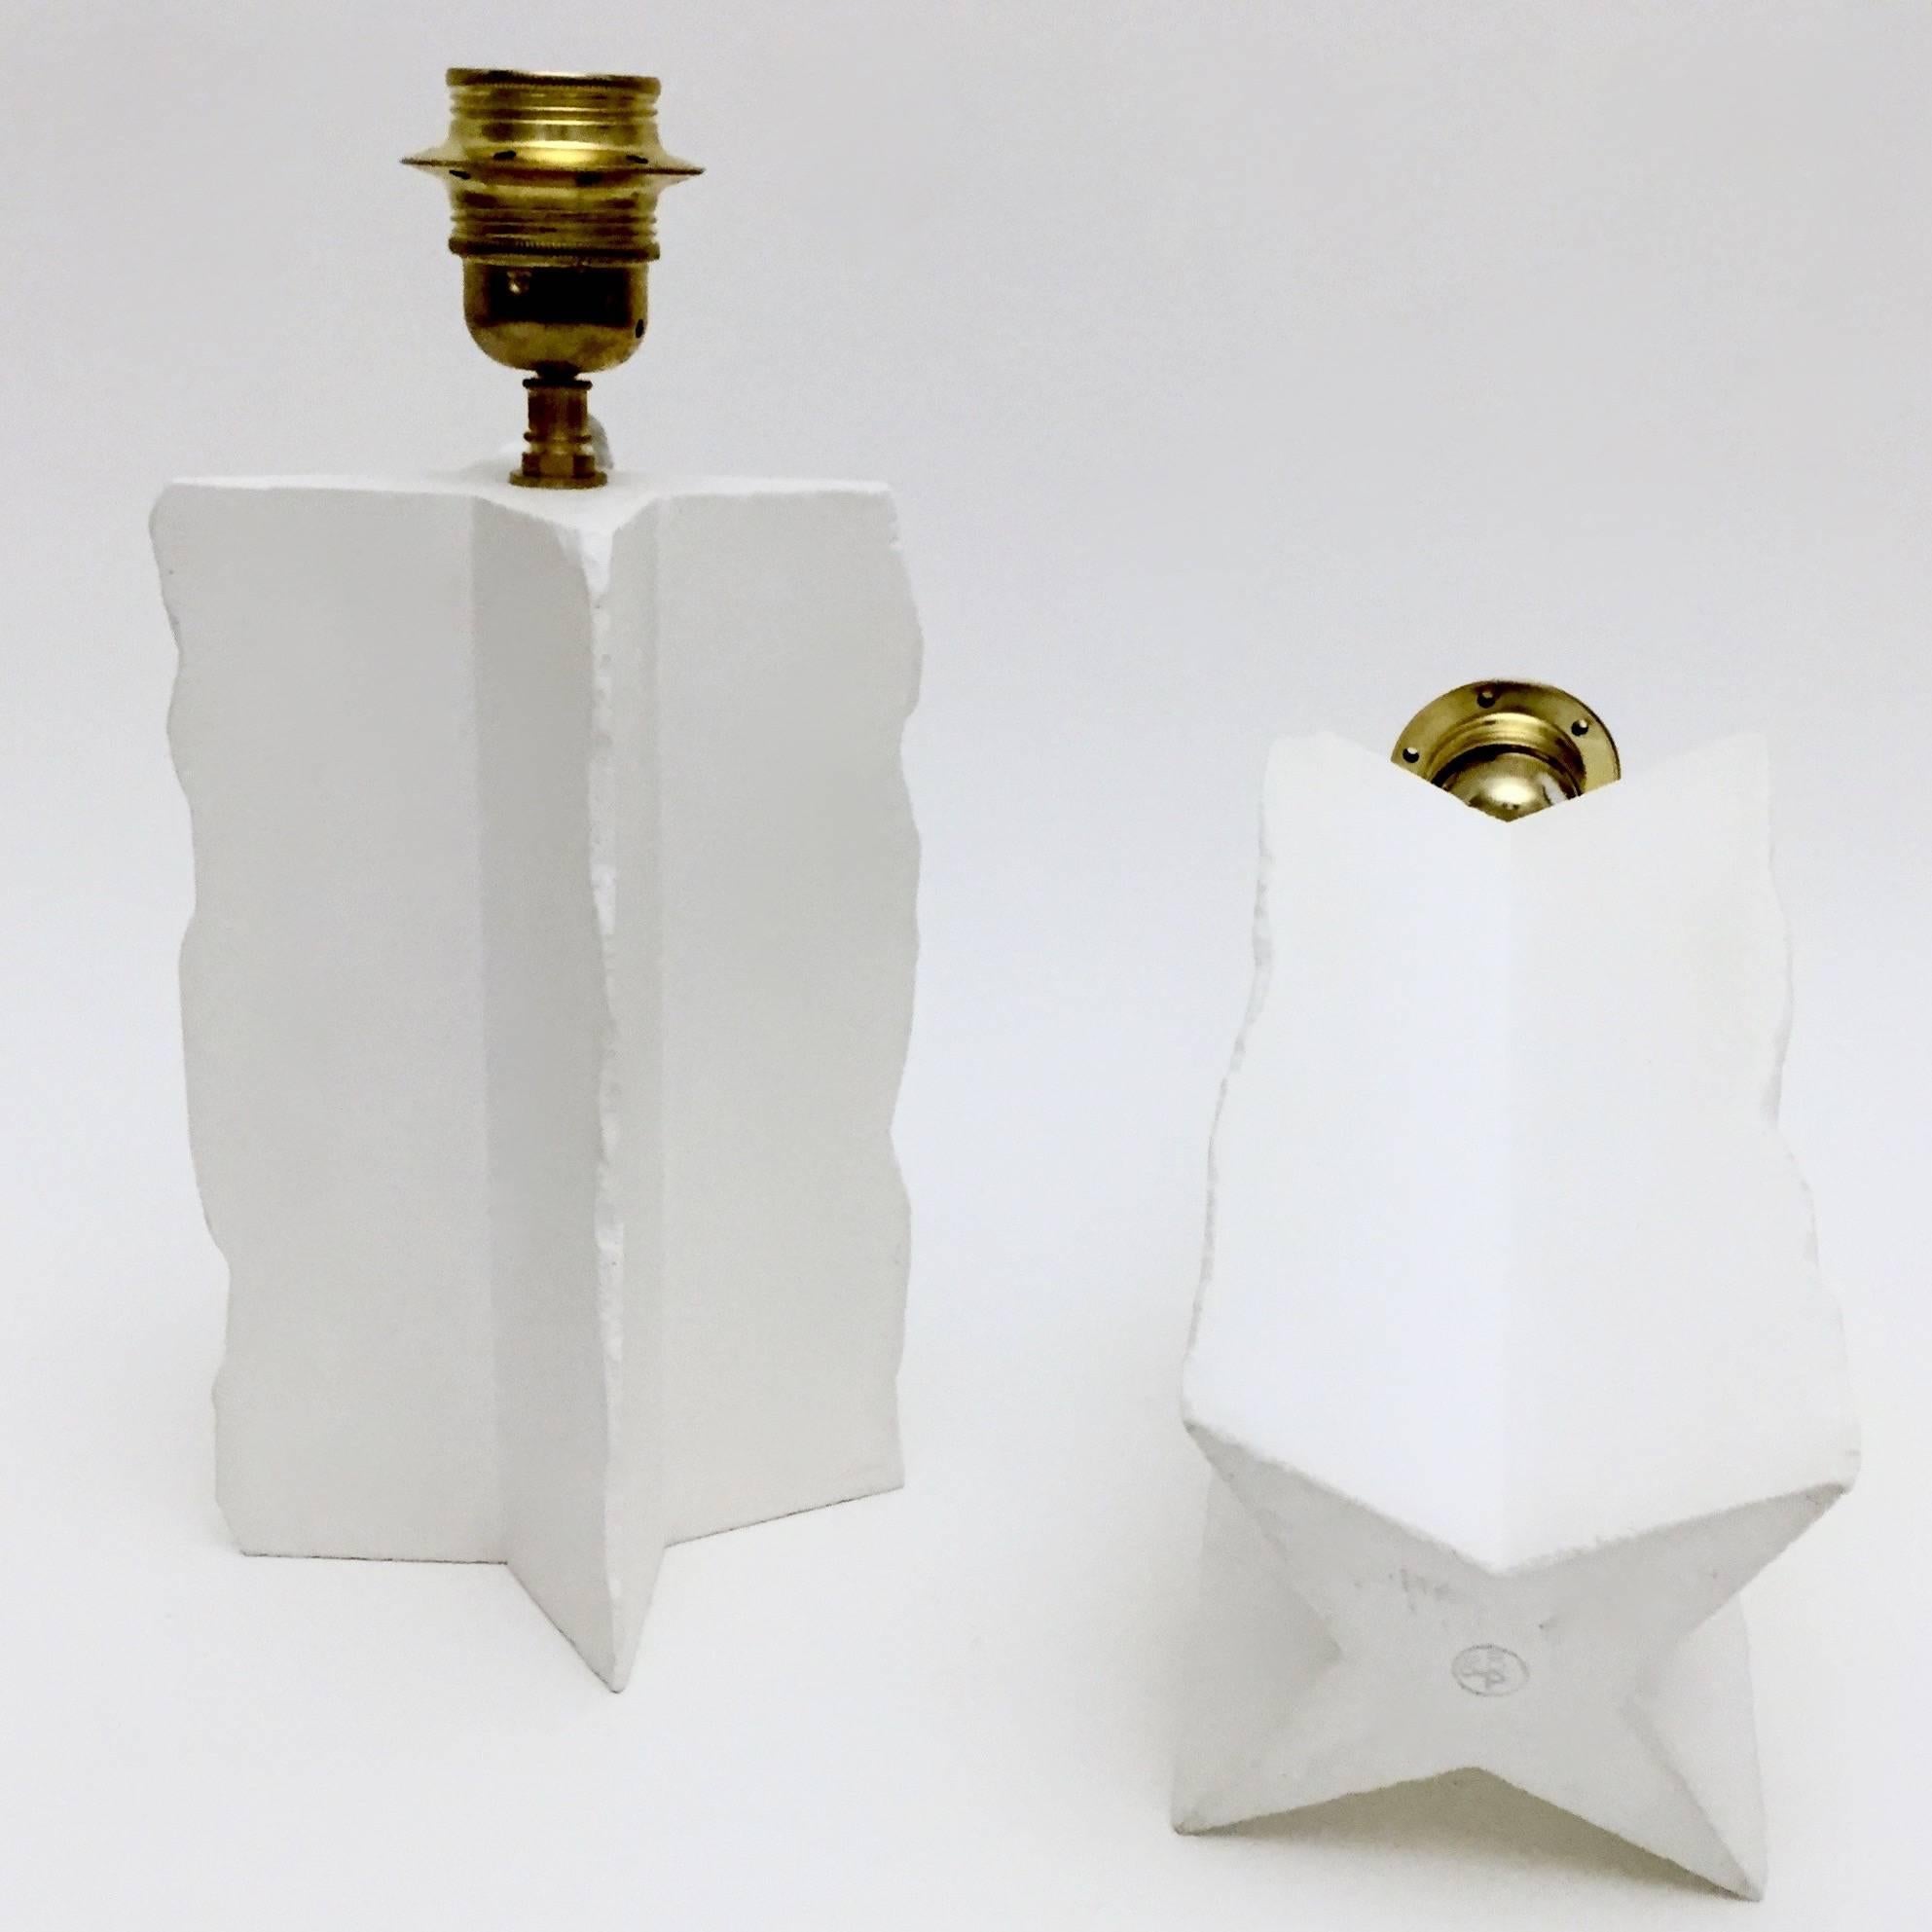 Polished Pair of White Plaster Lamp-Bases Forming a Cross